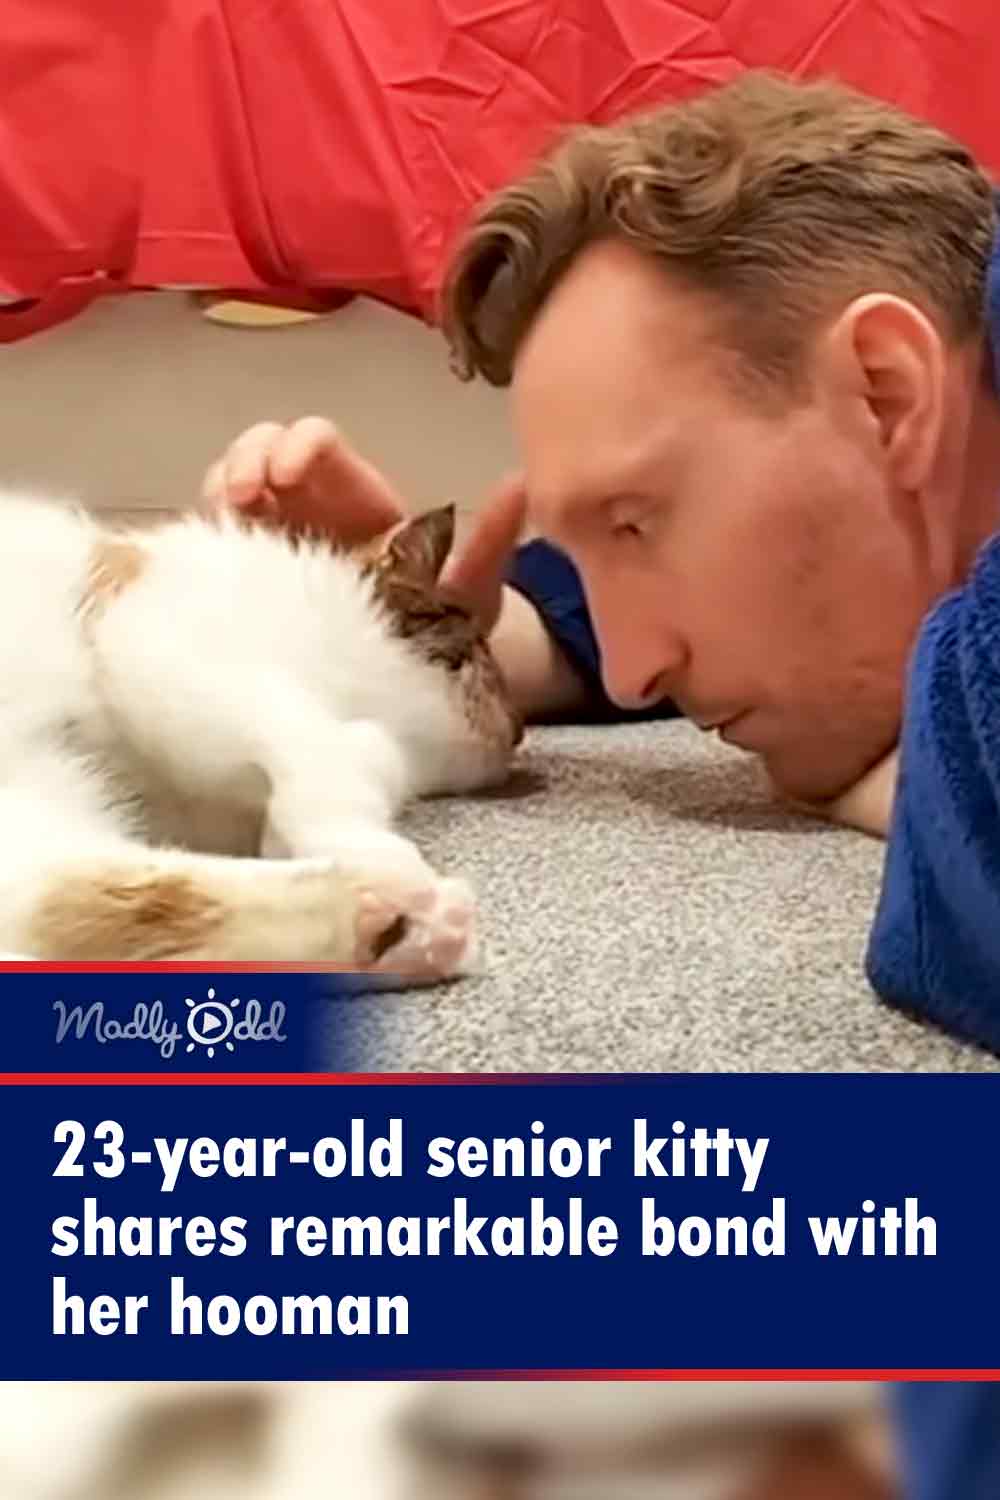 23-year-old senior kitty shares remarkable bond with her hooman